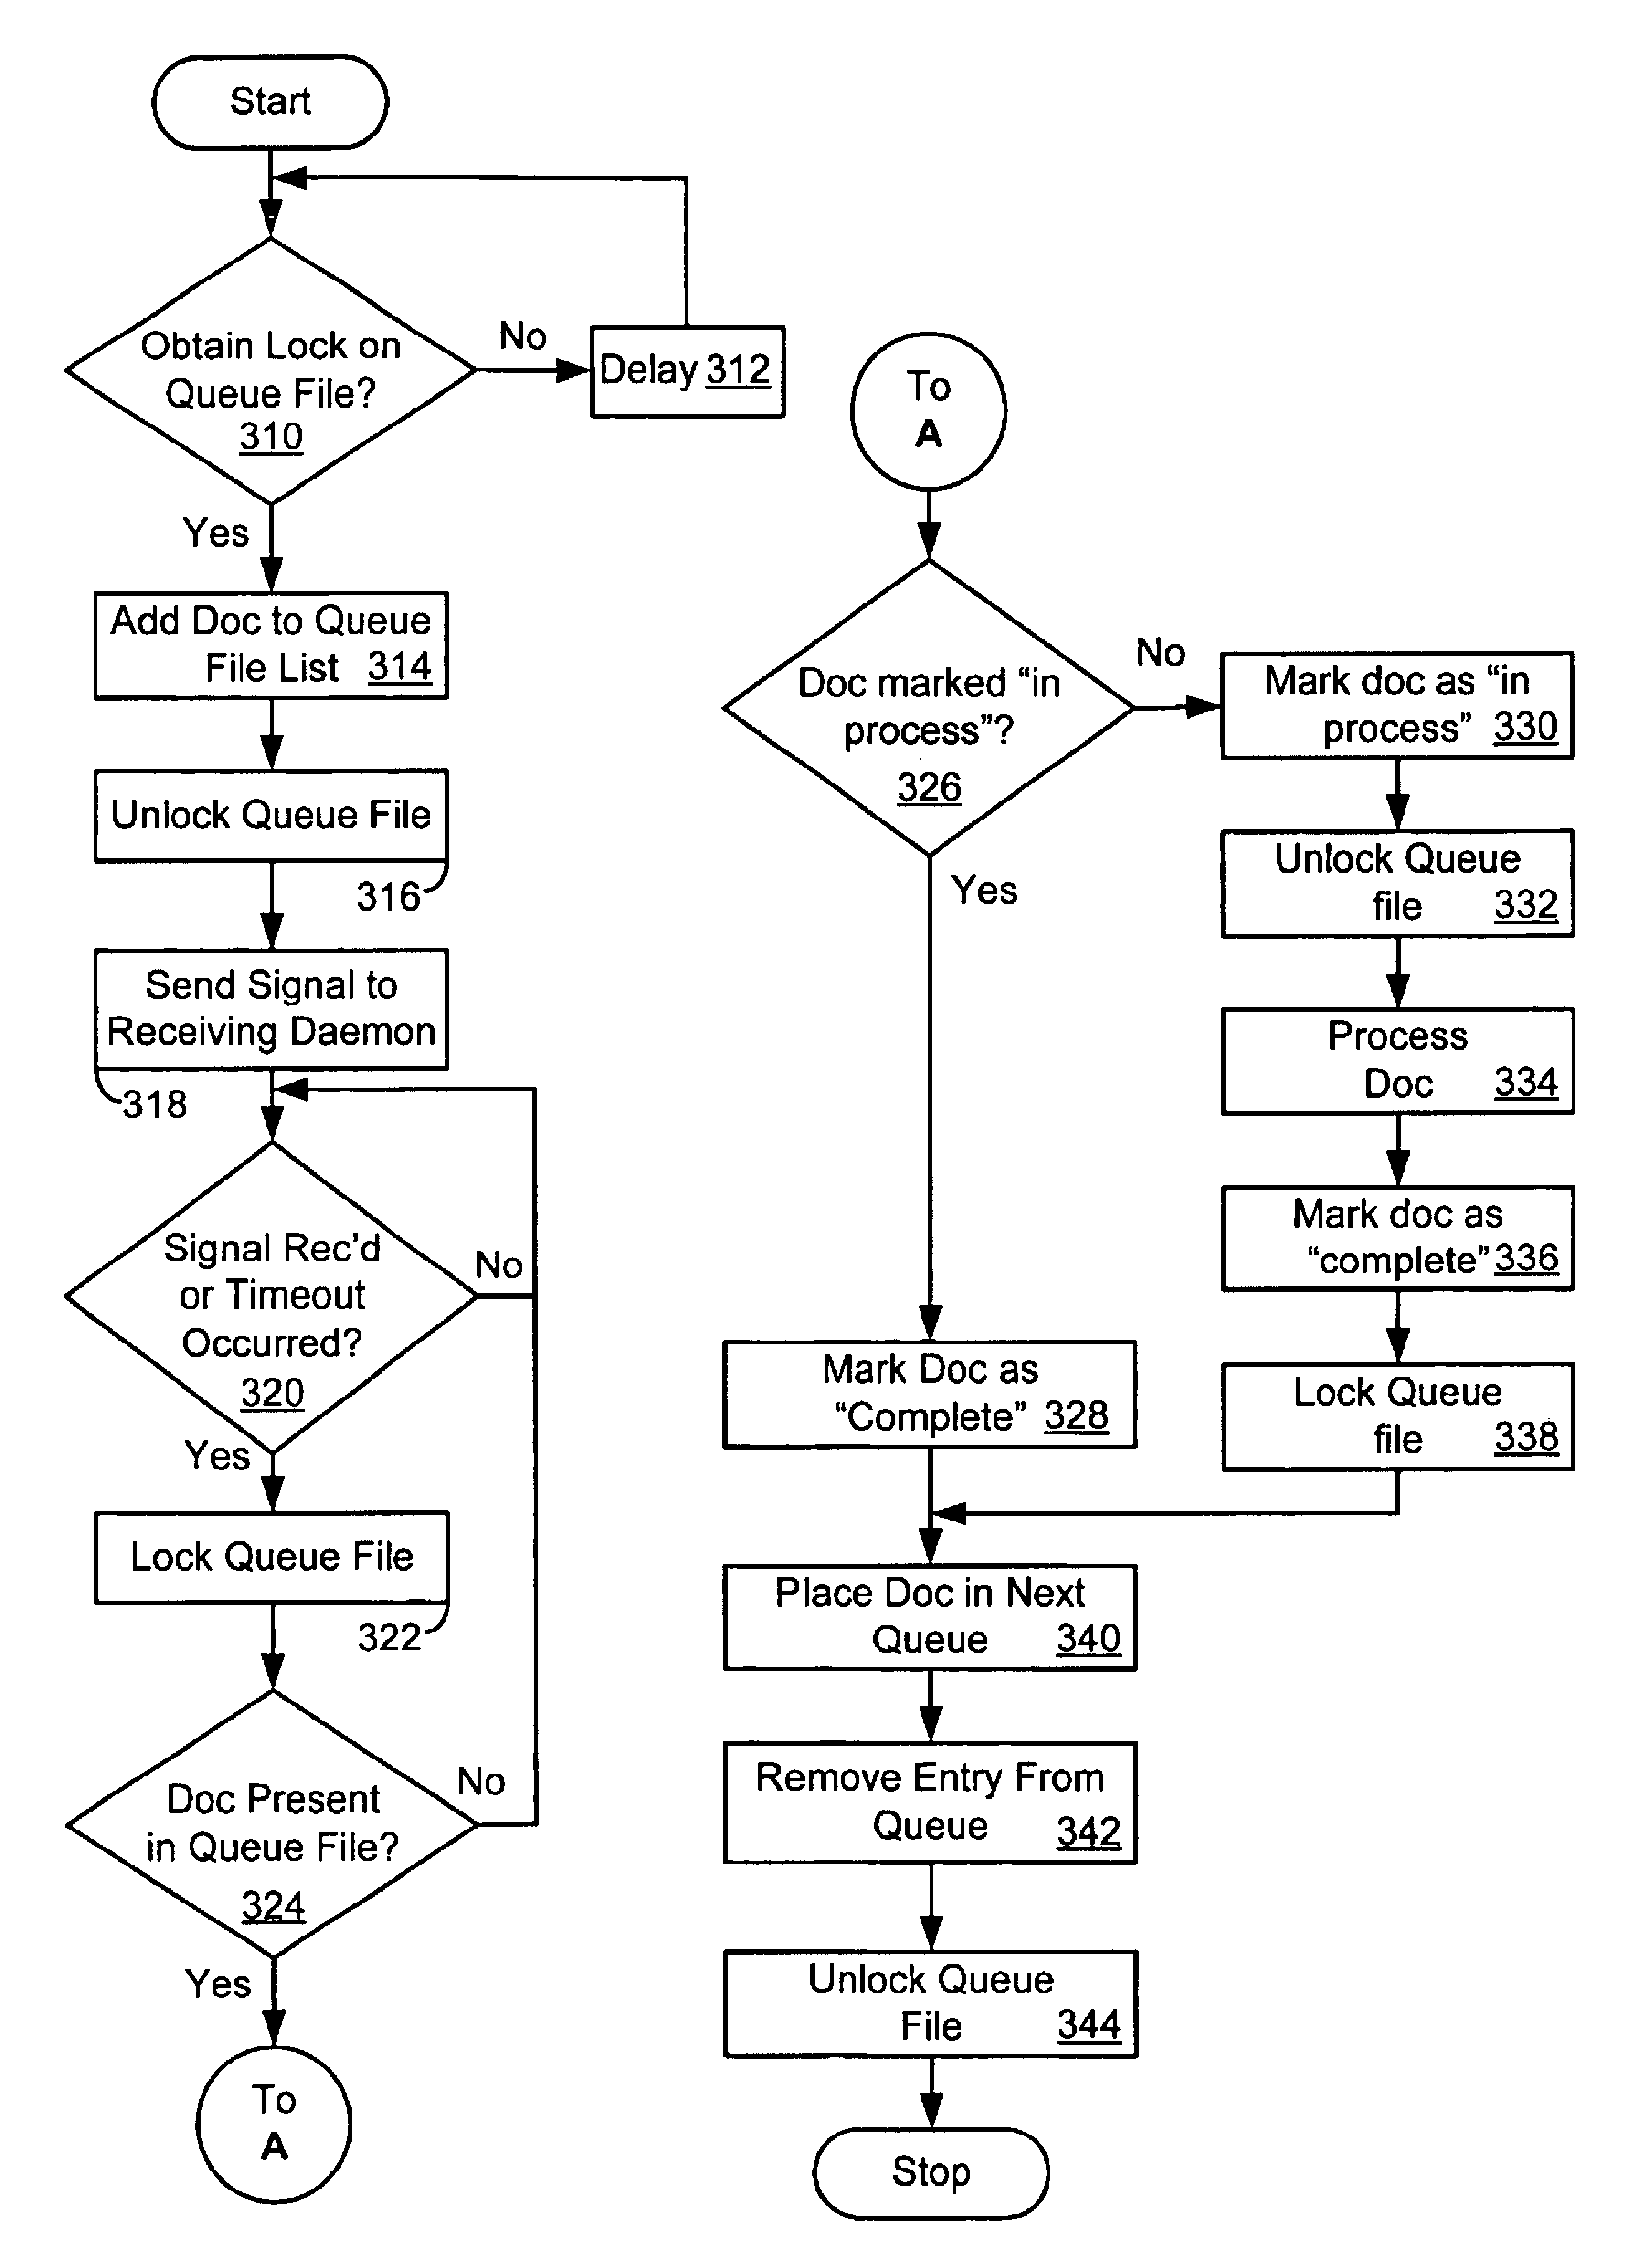 System and method of managing queues by maintaining metadata files having attributes corresponding to capture of electronic document and using the metadata files to selectively lock the electronic document